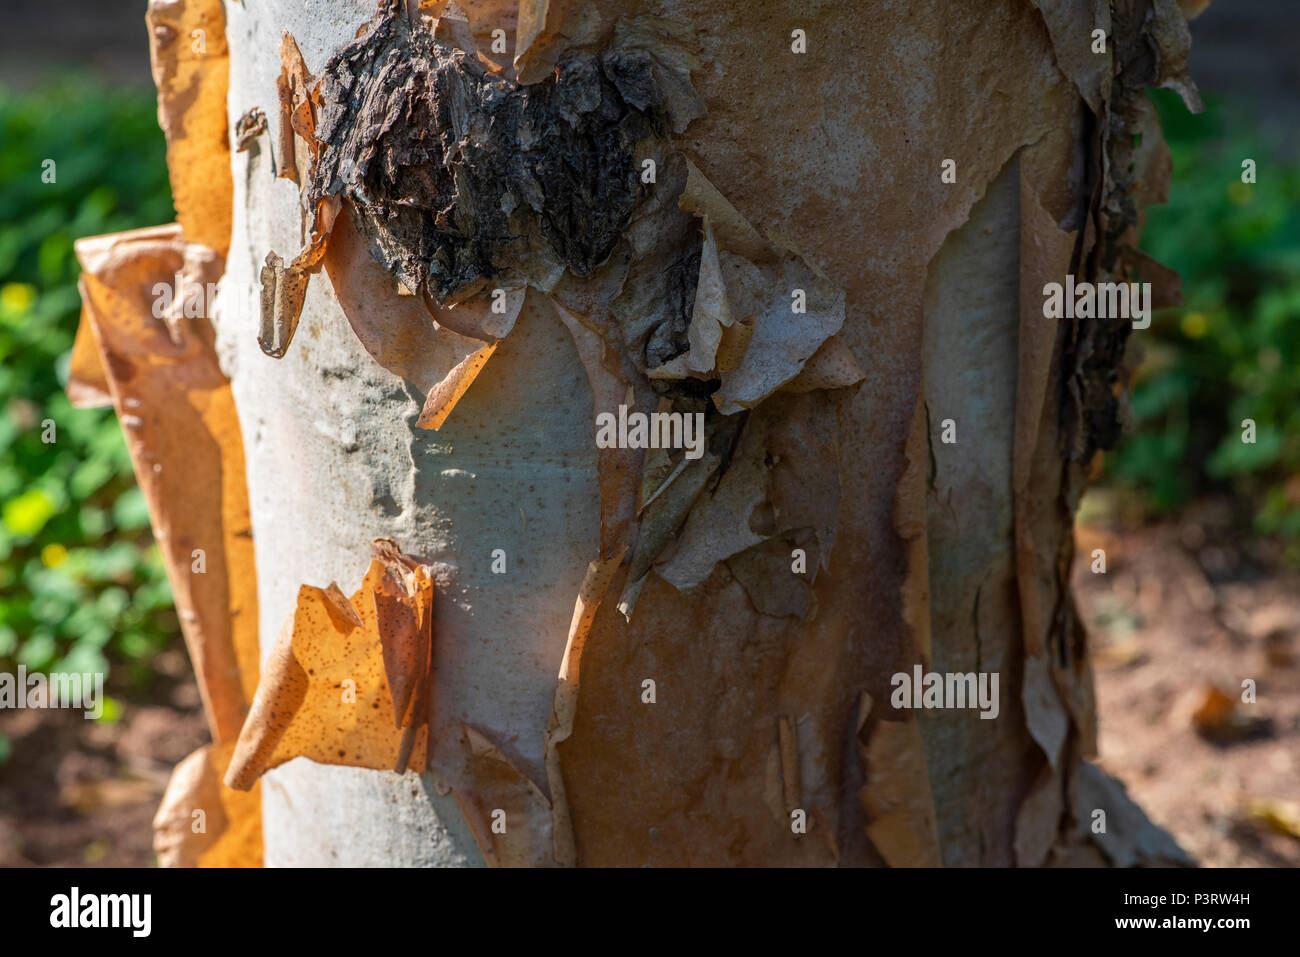 The papery bark of a Commiphora tree flaking off Stock Photo